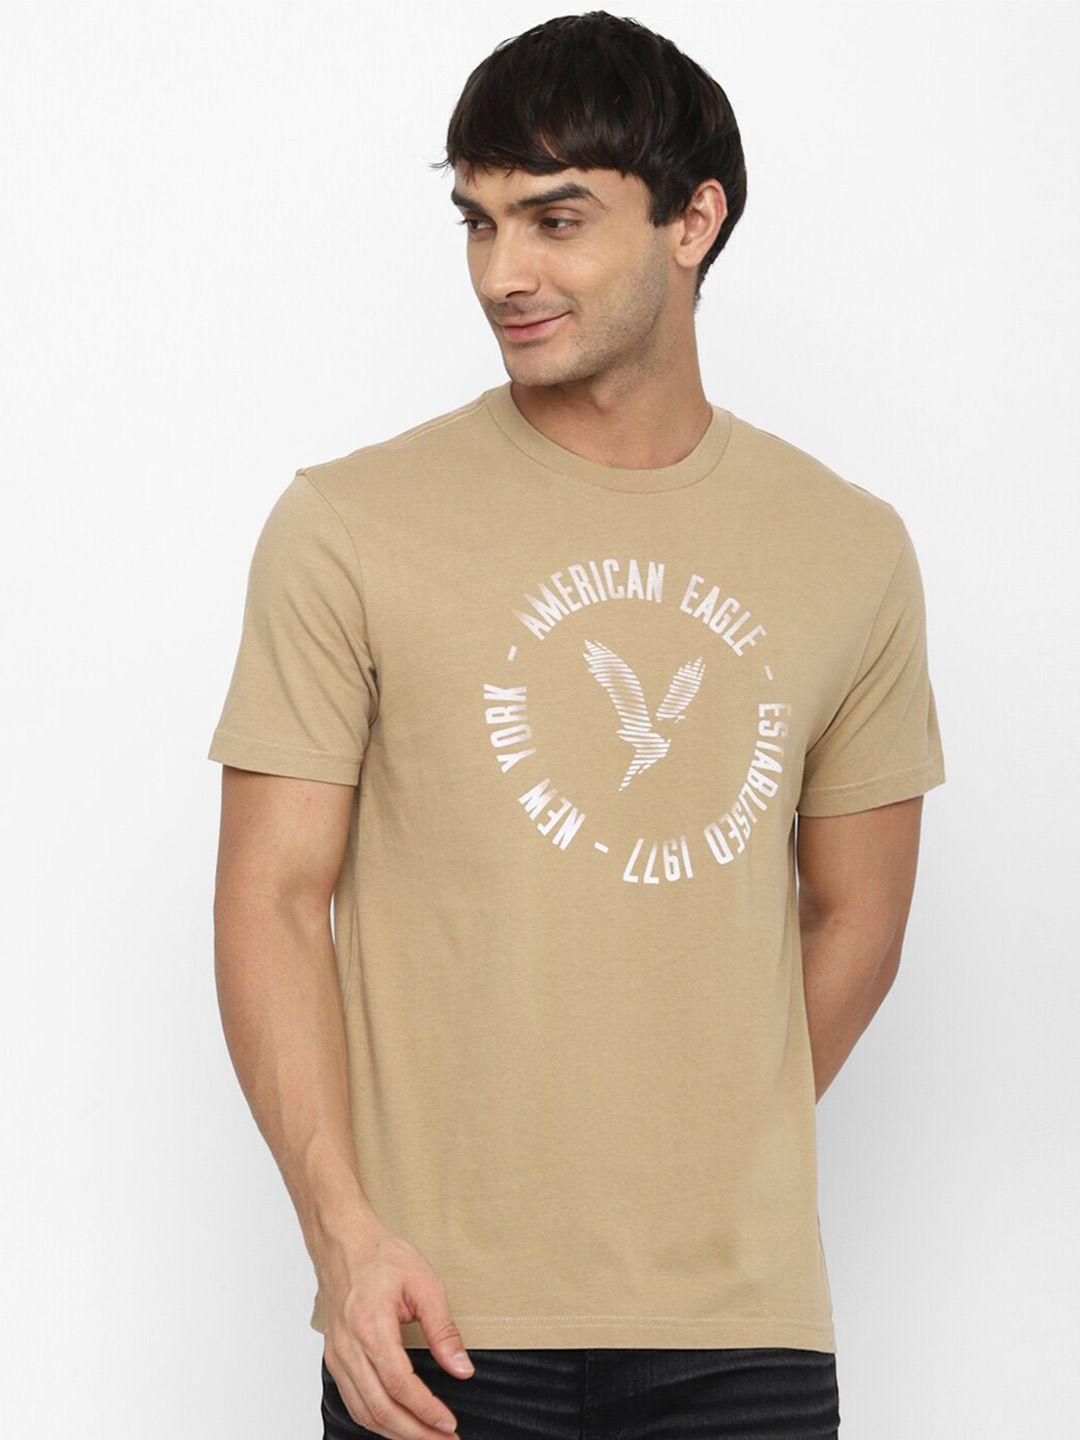 american eagle outfitters typography printed pure cotton t-shirt